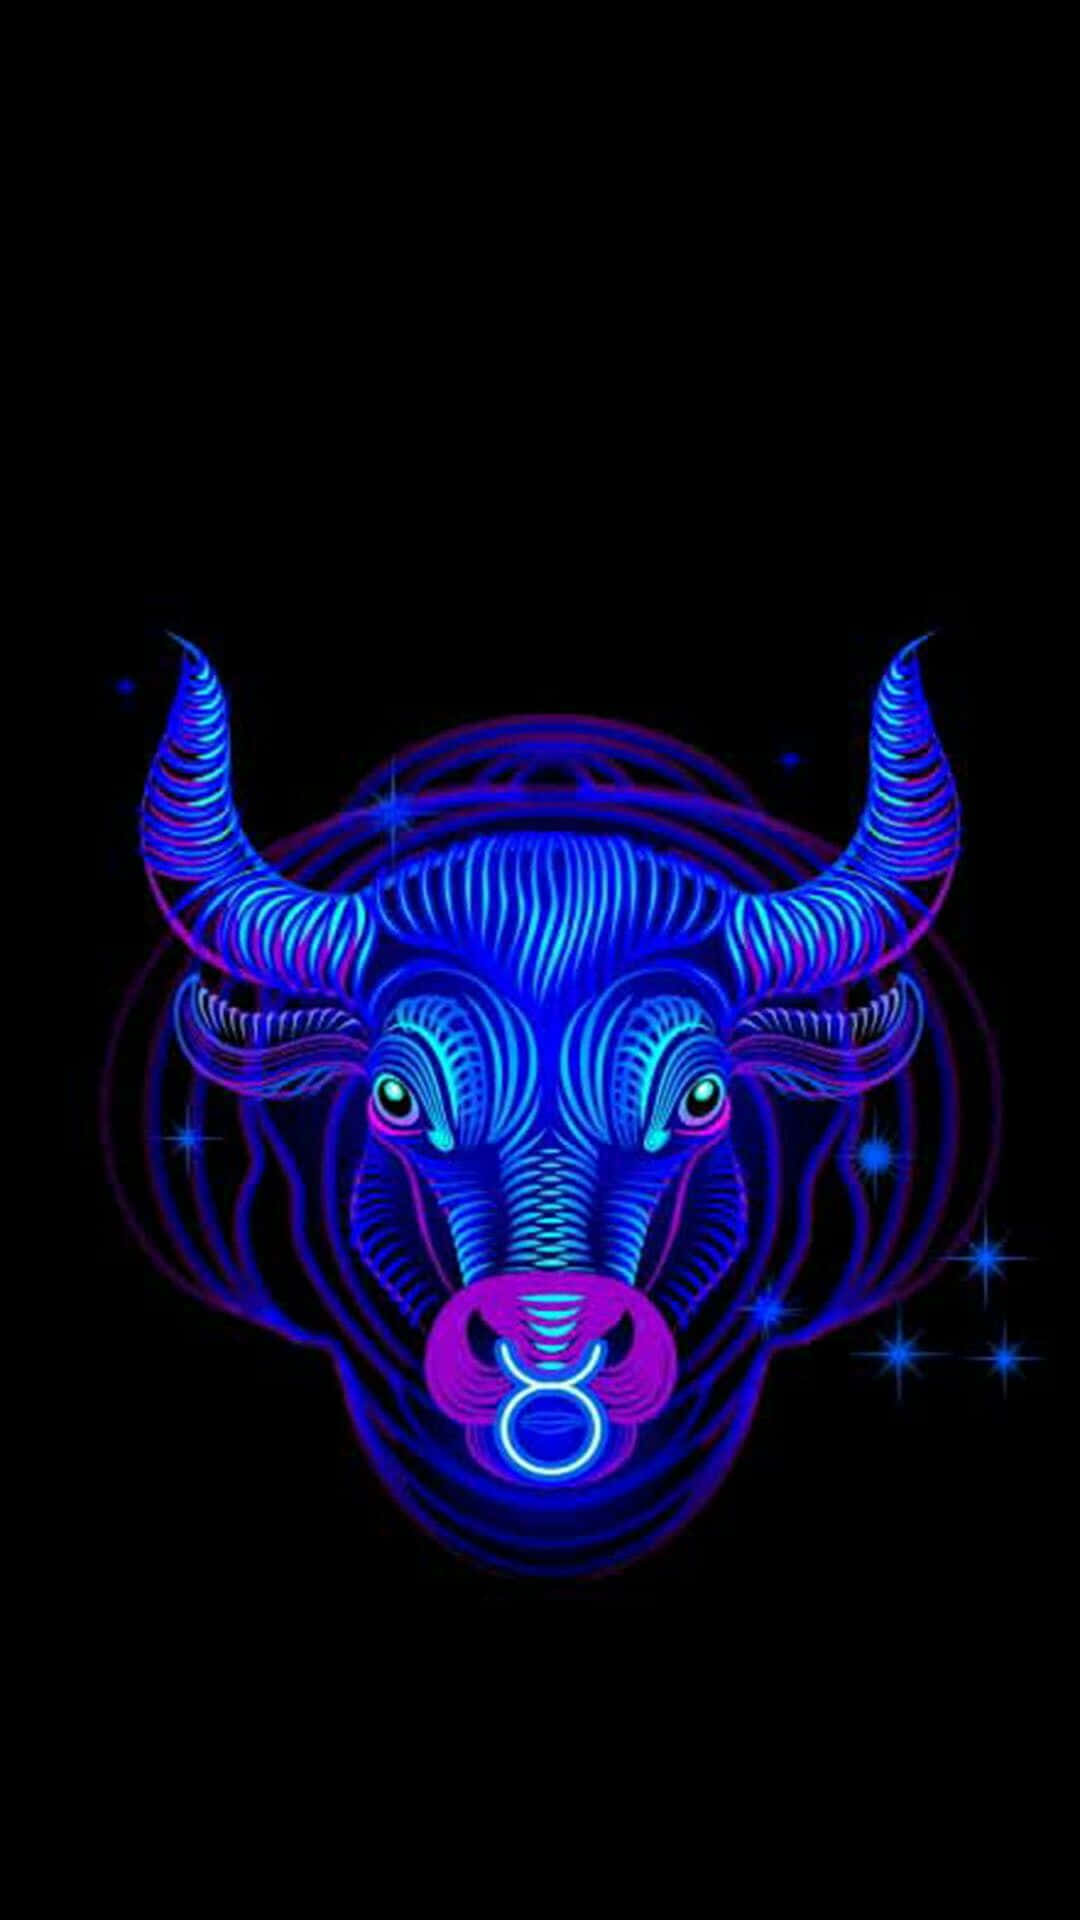 A Taurus Symbol of Strength and Loyalty